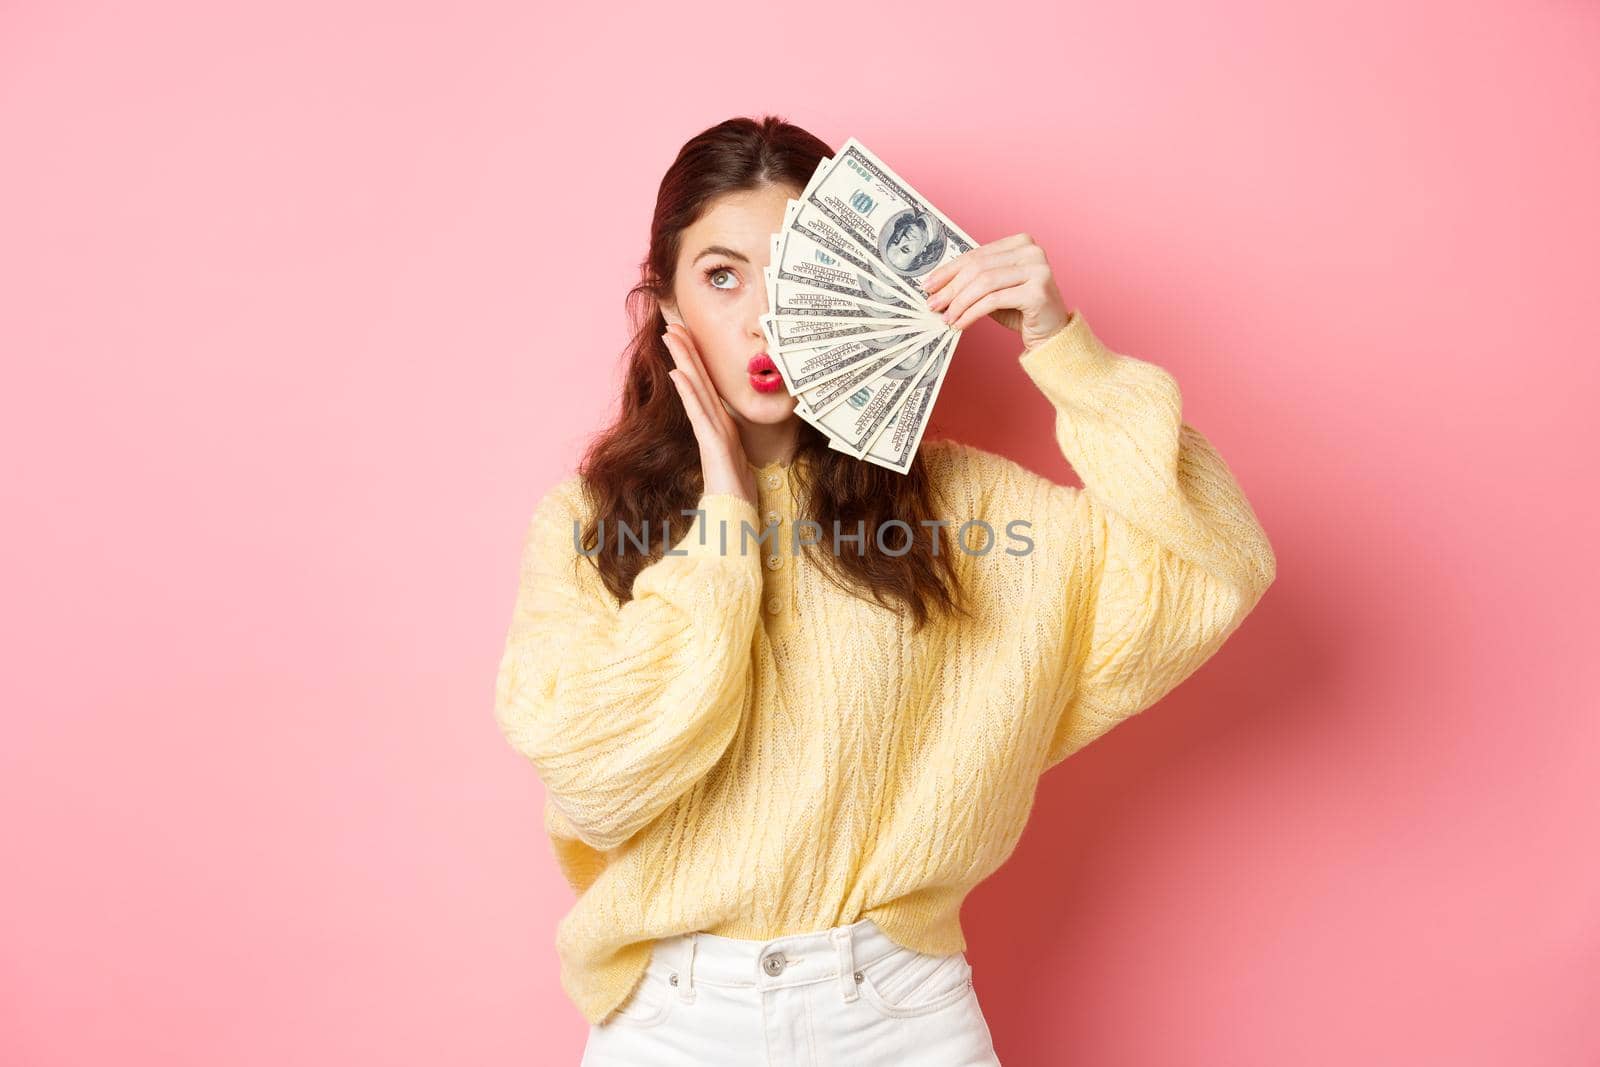 Attractive female model showing money, holding dollar bills on half of face, touching cheek and making kissing lips, standing against pink background.